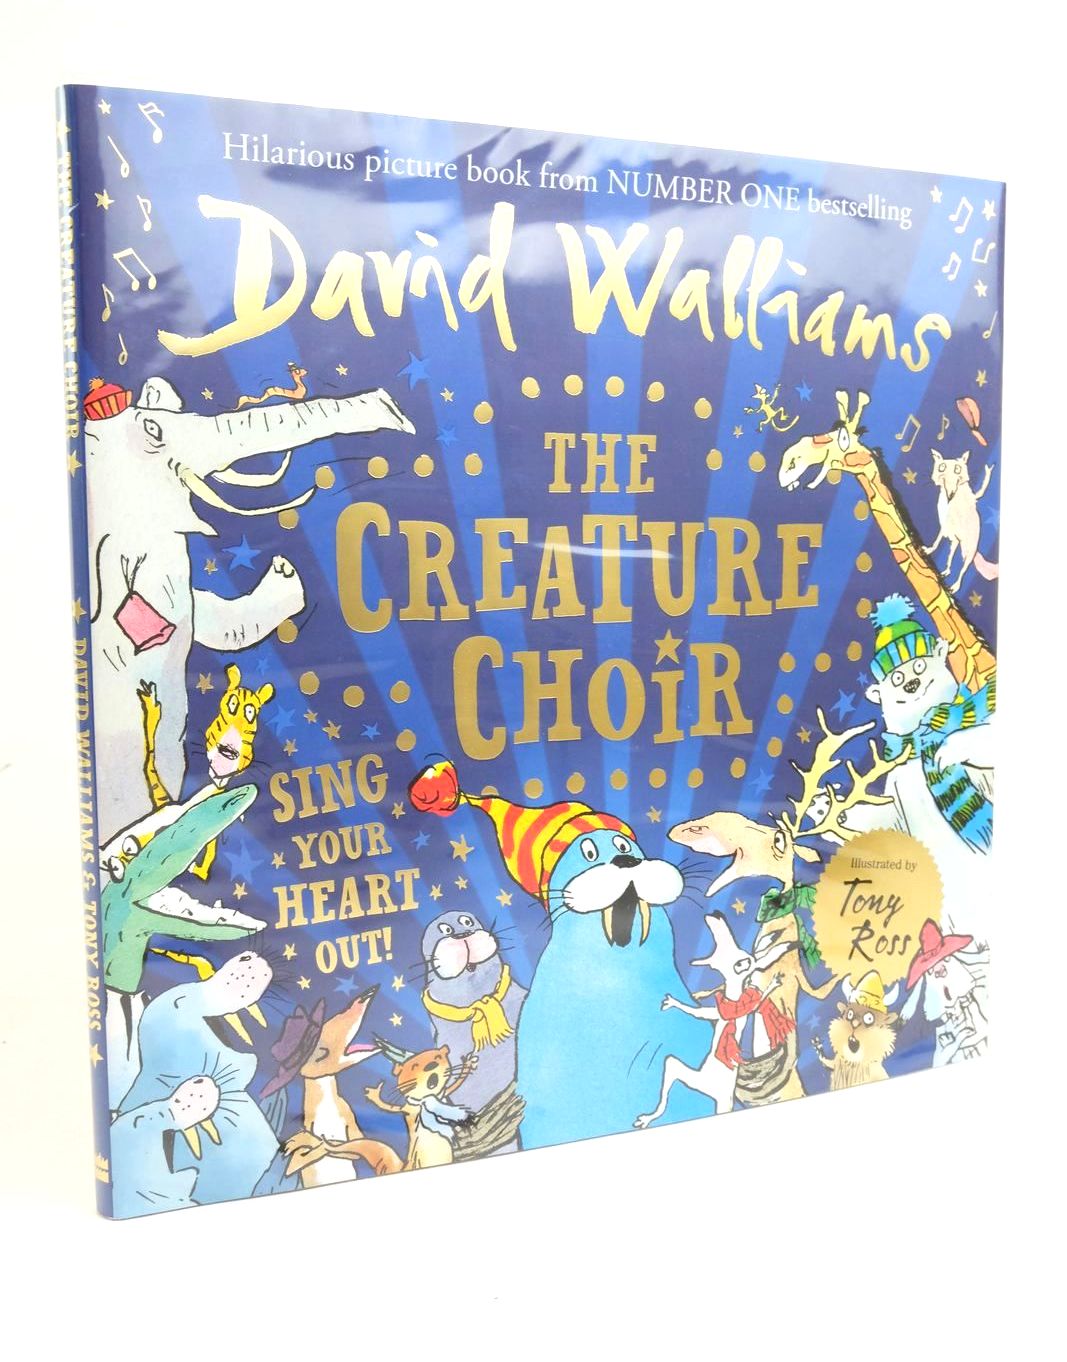 Photo of THE CREATURE CHOIR written by Walliams, David illustrated by Ross, Tony published by Harper Collins Childrens Books (STOCK CODE: 1322346)  for sale by Stella & Rose's Books